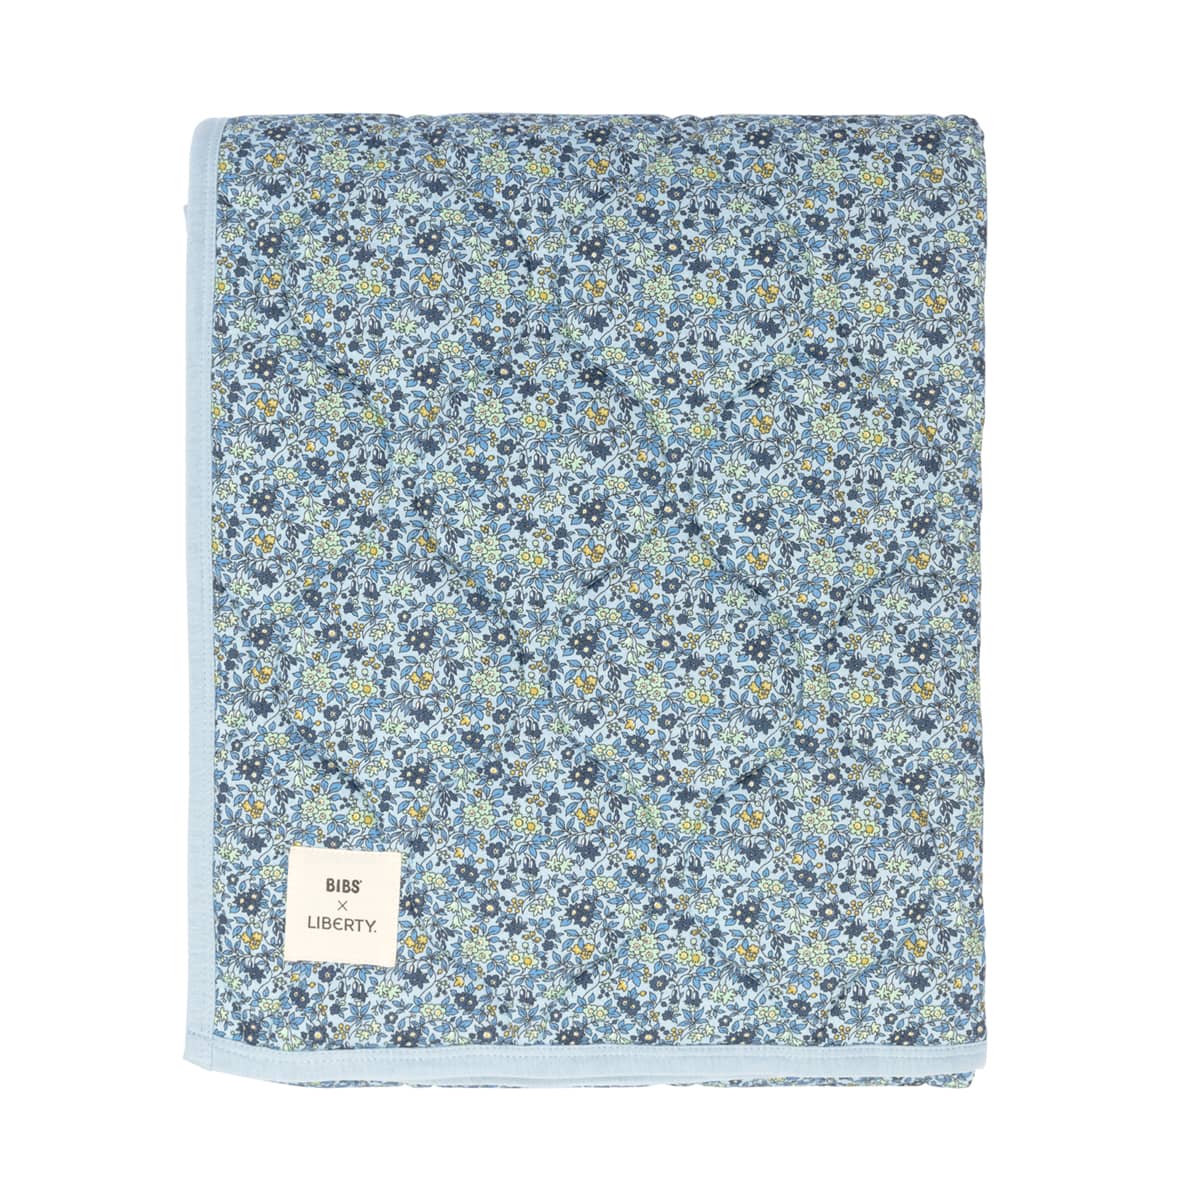 BIBS x LIBERTY Quilted Blanket - Chamomile Lawn / Baby Blue